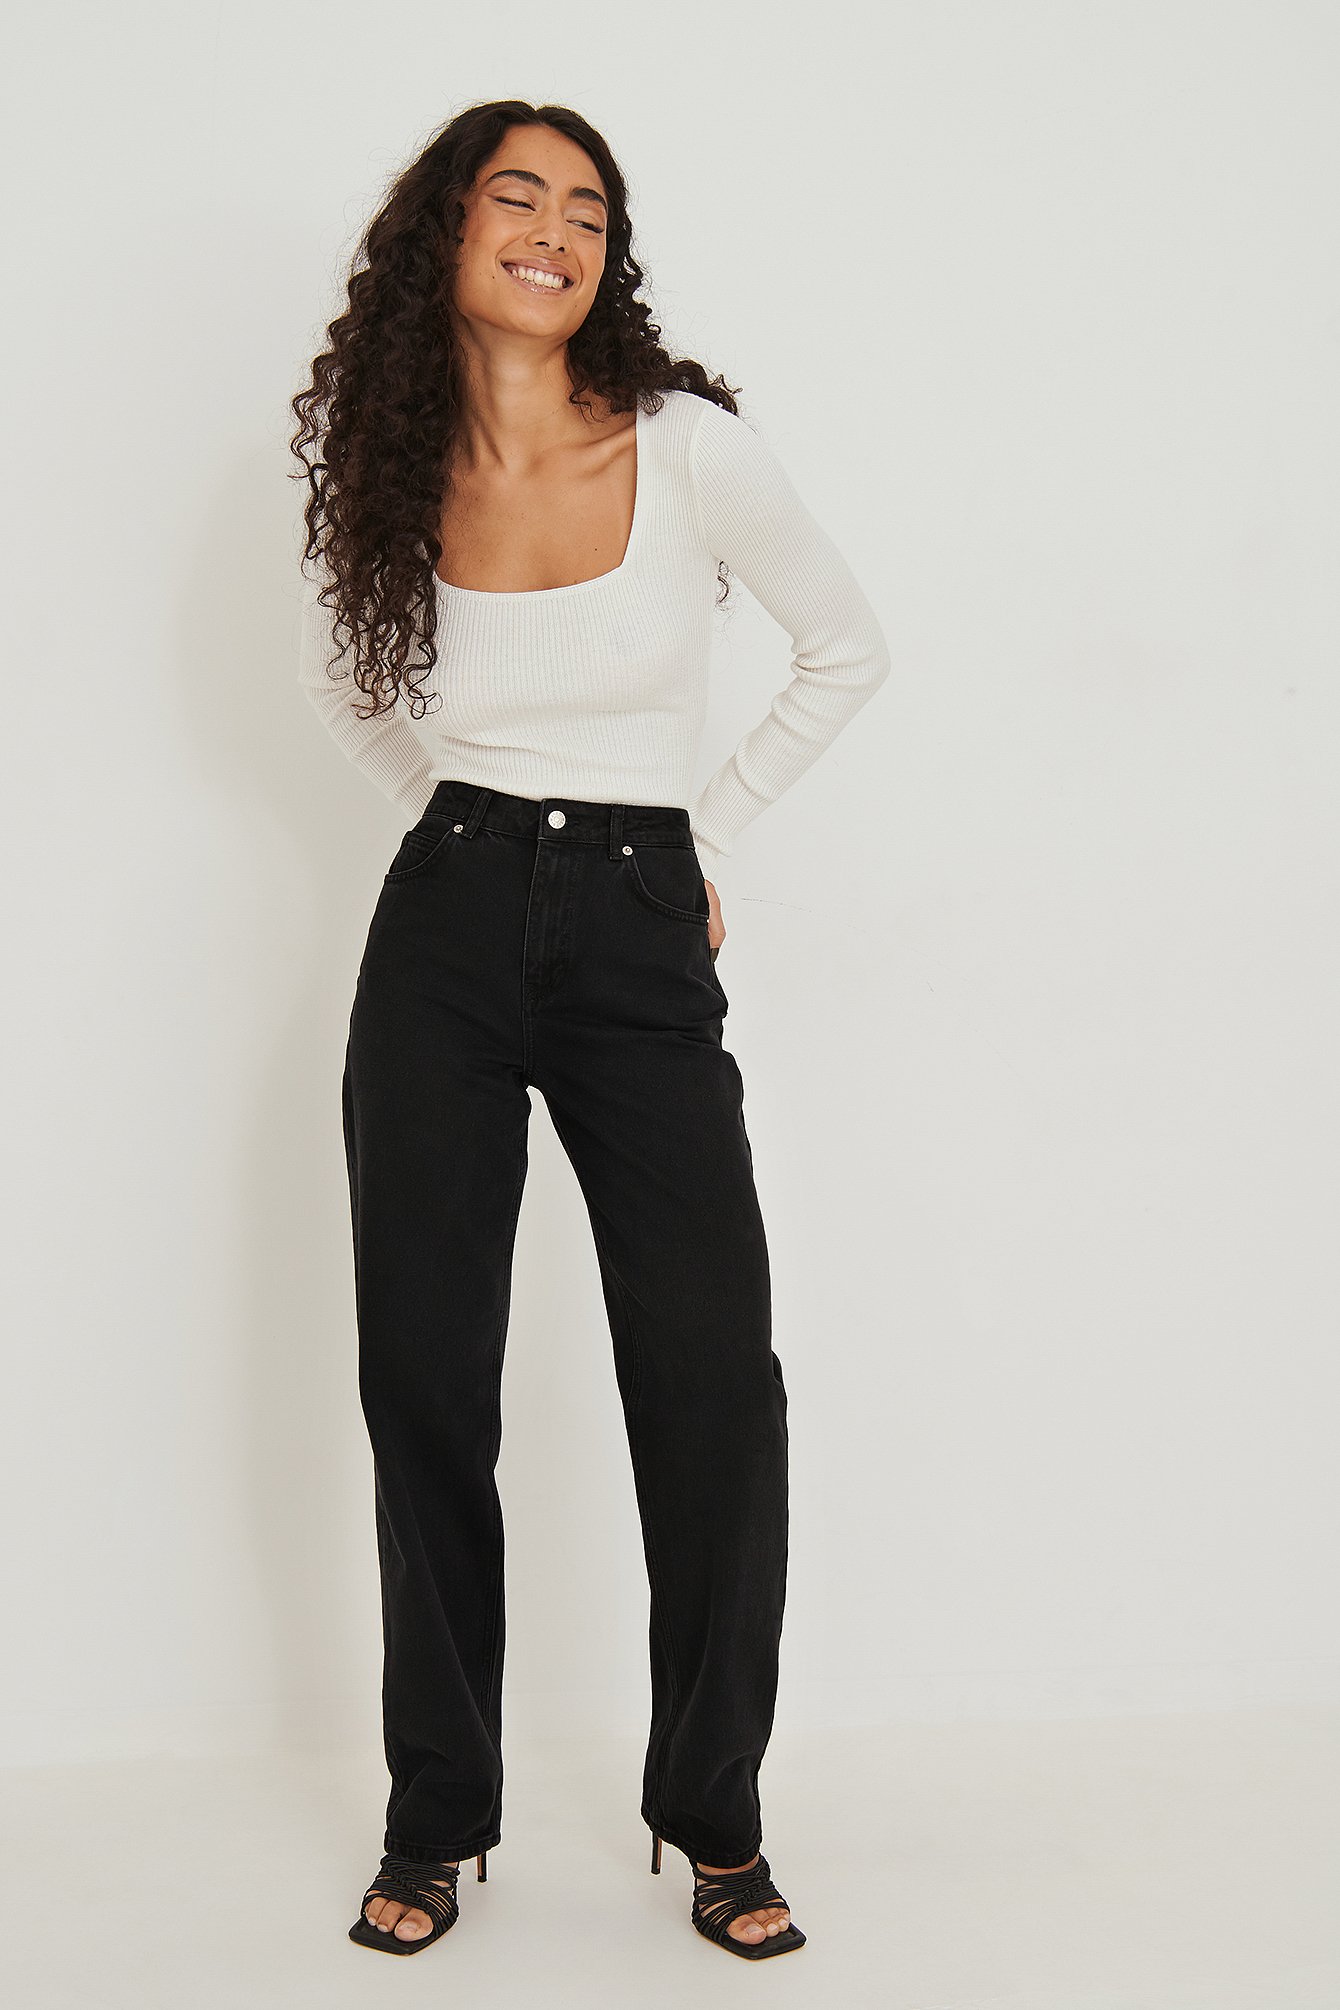 TOPSHOP Denim Belted High Waisted Jeans in Black Womens Clothing Jeans Straight-leg jeans 